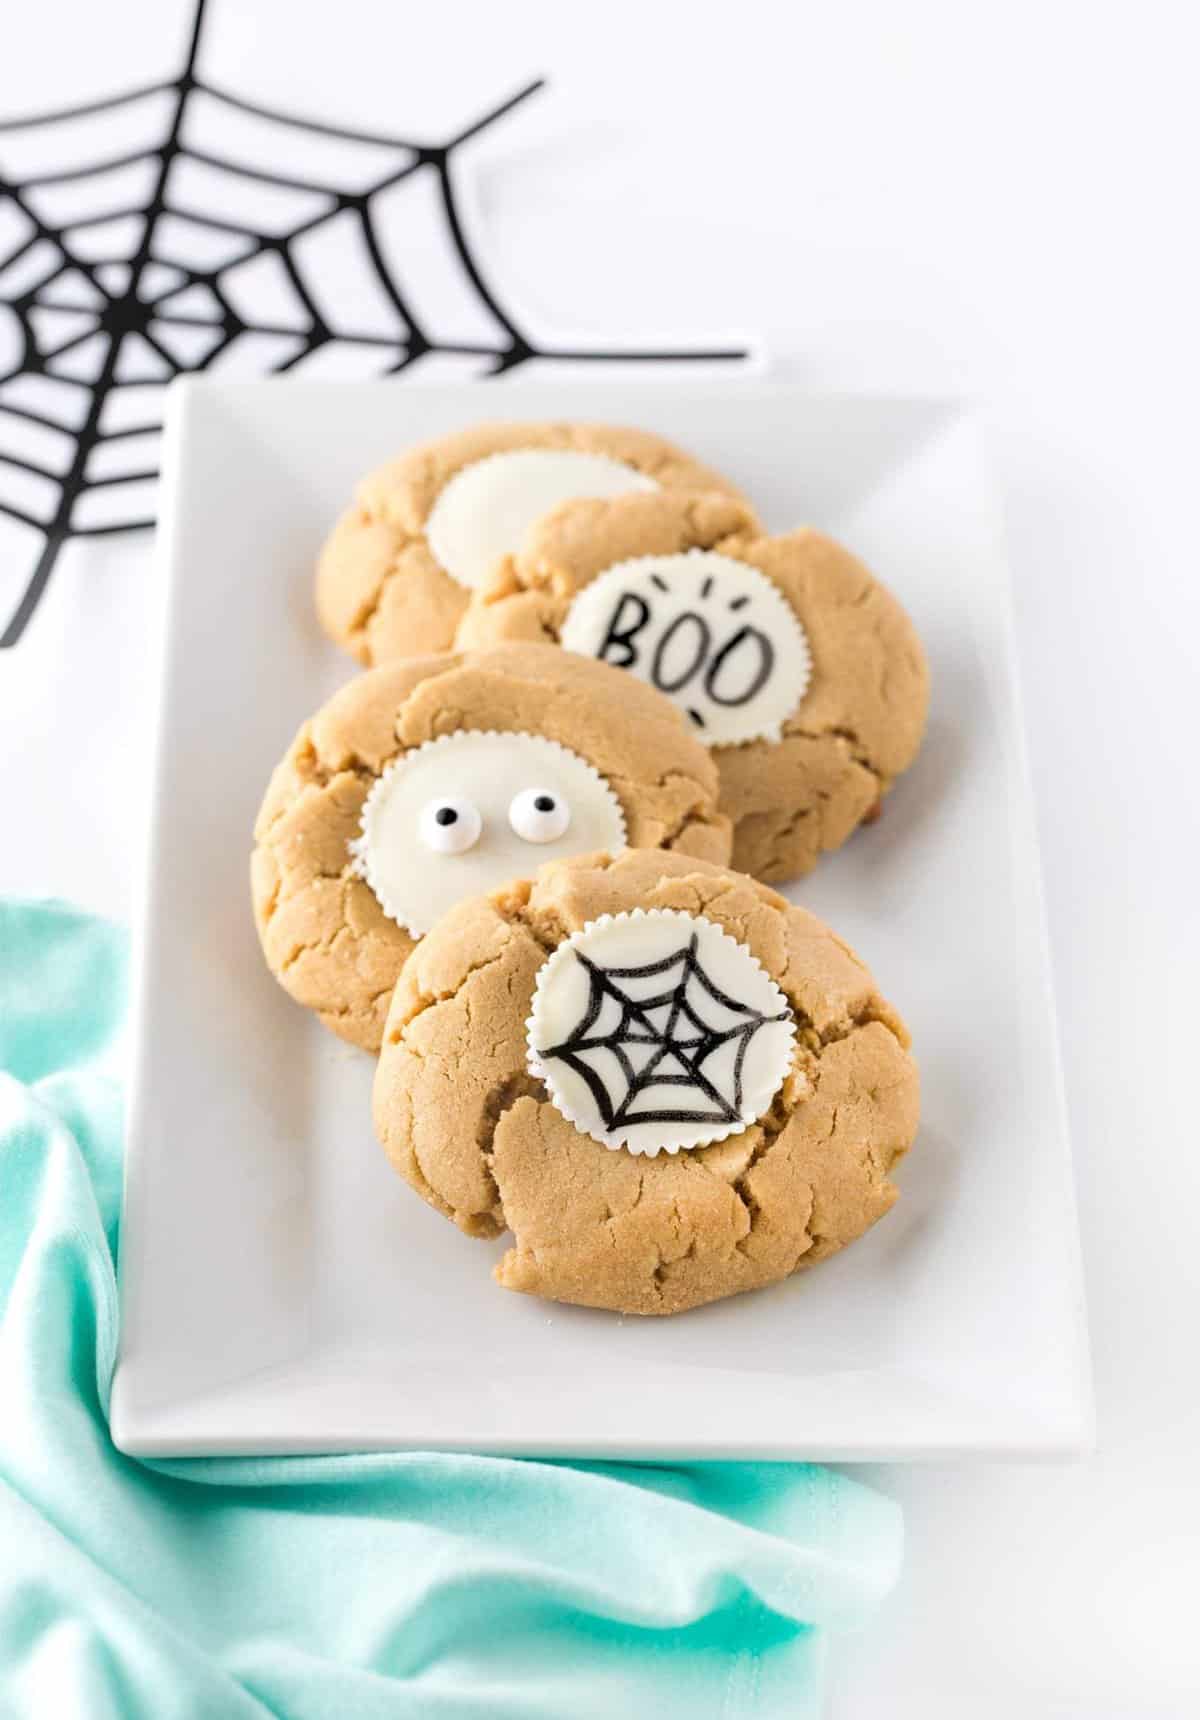 Forget the fancy decorating and grab the edible food pen to draw-your-own easy Halloween cookies! Using a traditional peanut butter cup as the "canvas", you can customize with your own icons, faces or spooktacular phrases! #Halloween | #Cookies | www.DesignEatRepeat.com